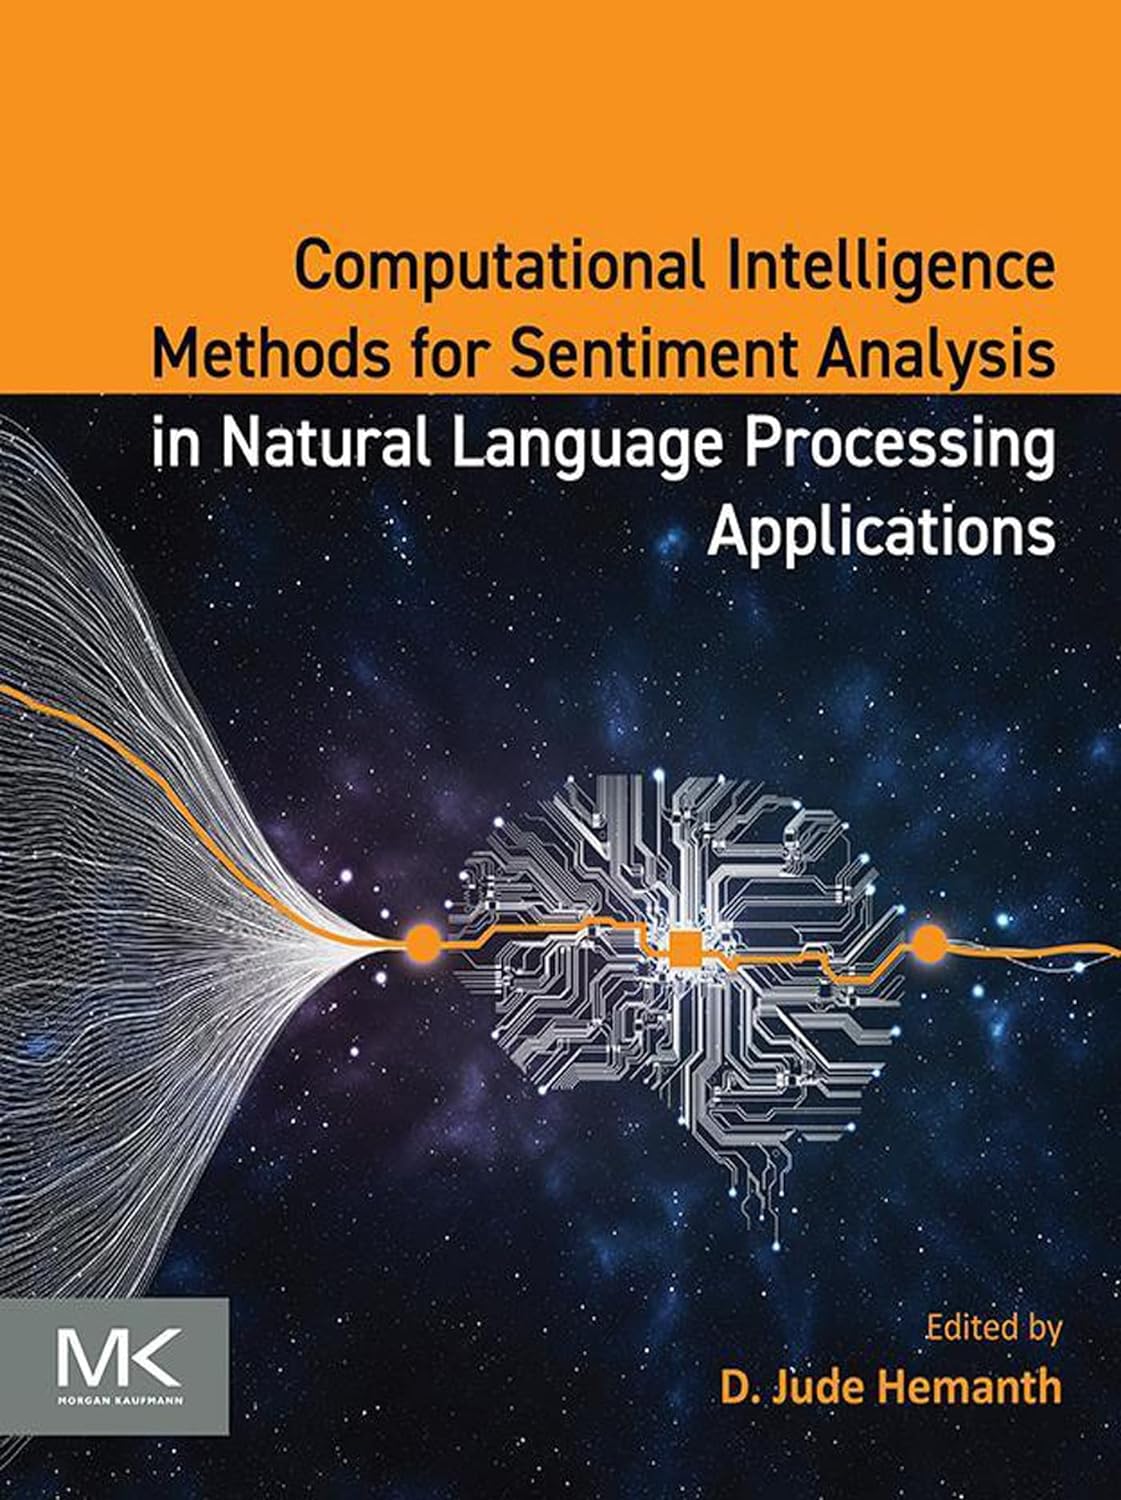 (EBook PDF)Computational Intelligence Methods for Sentiment Analysis in Natural Language Processing Applications 1st Edition by D. Jude Hemanth